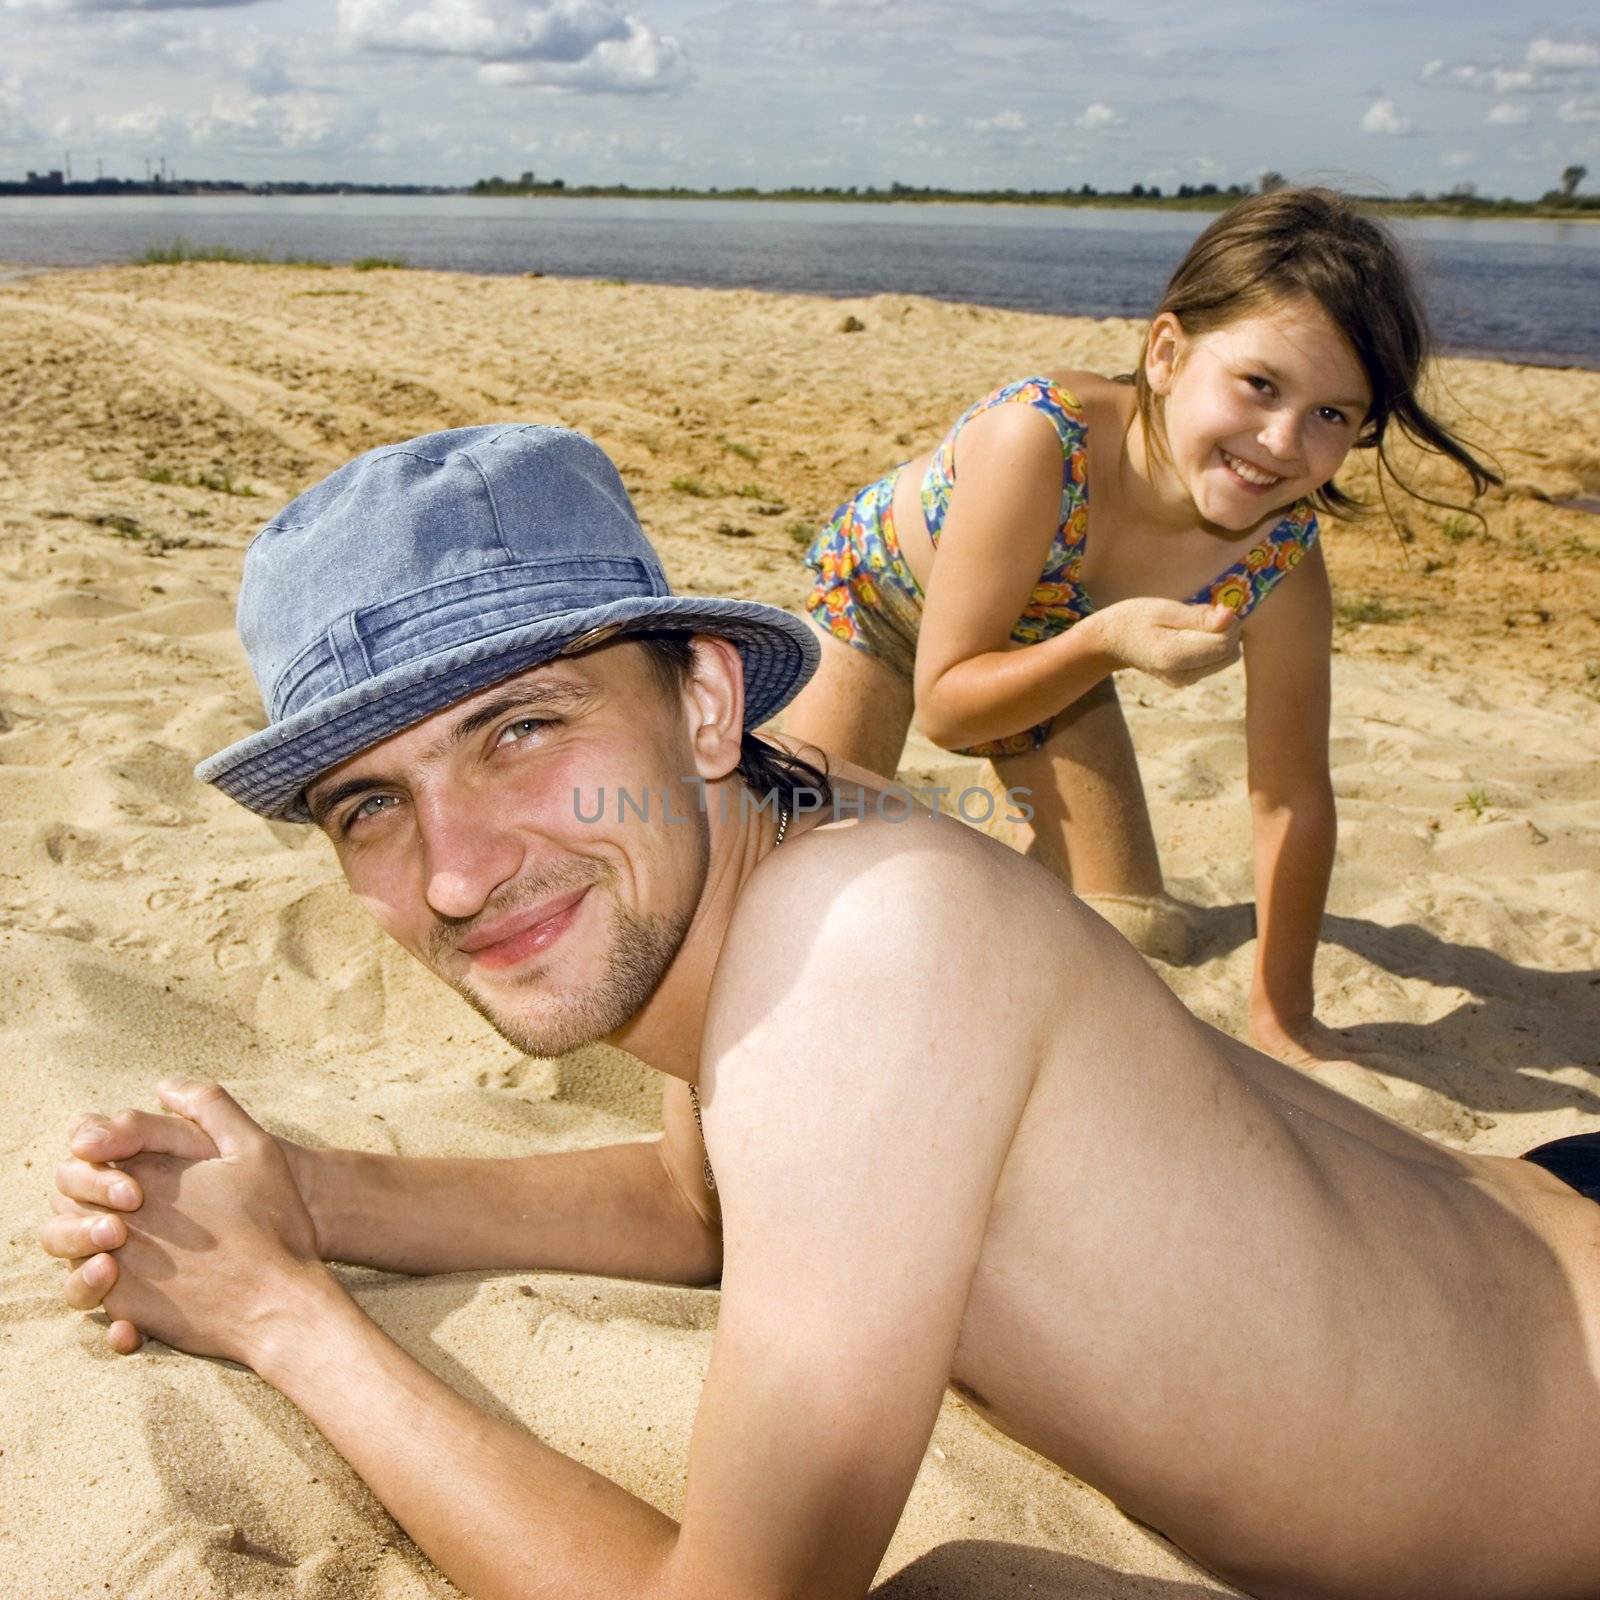 The young man and the girl on a beach at the river